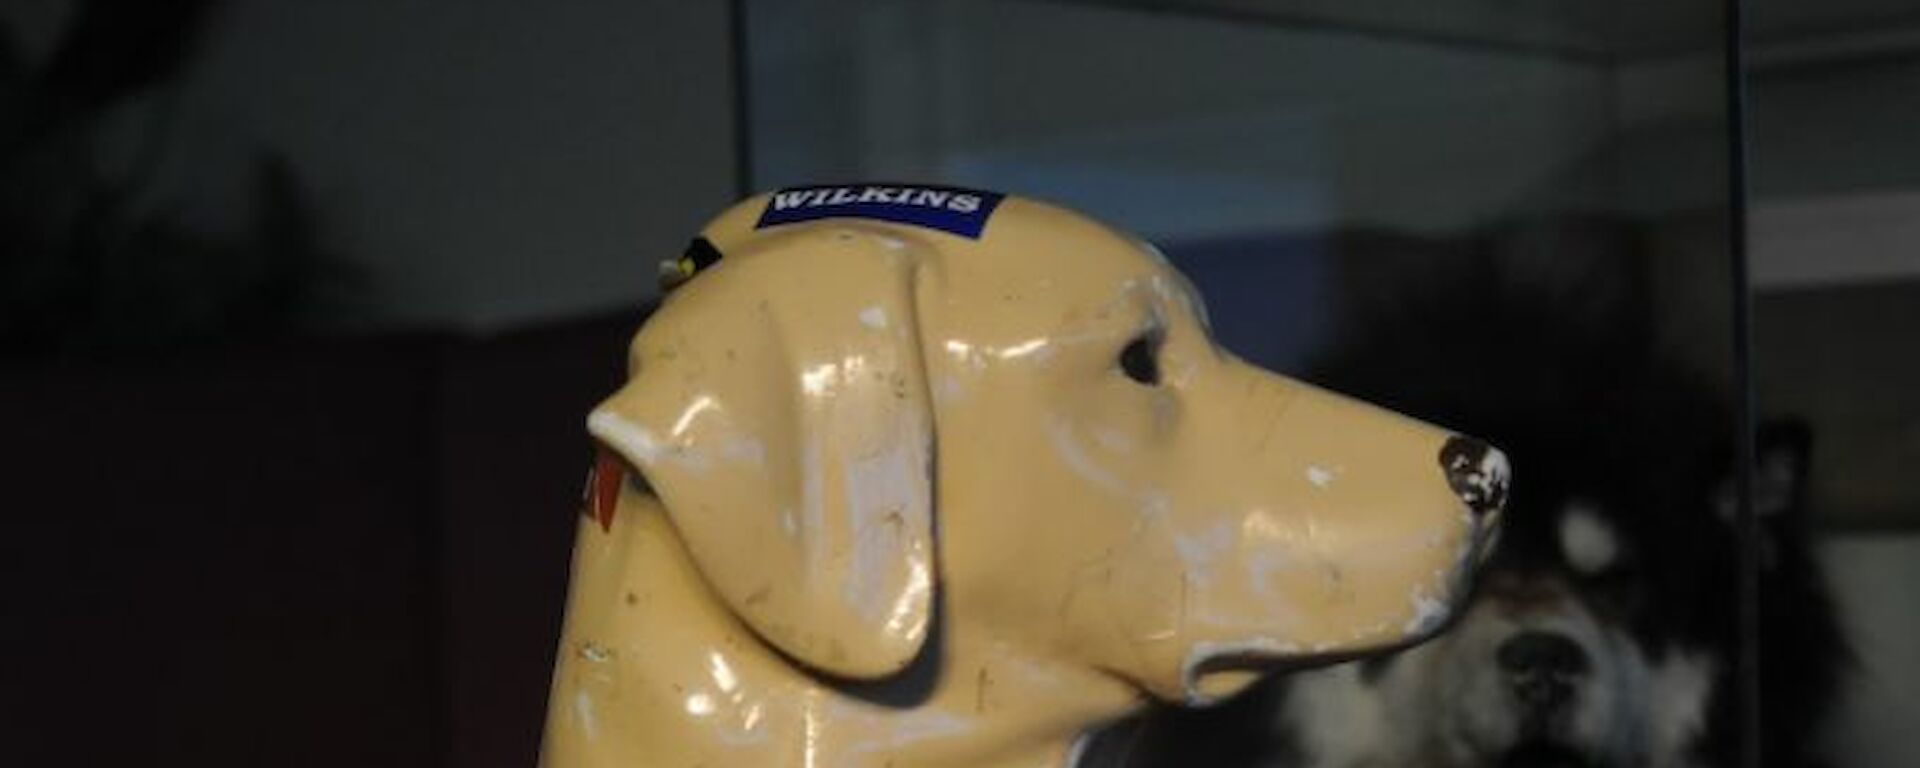 Stay the plastic yellow labrador, a station mascot